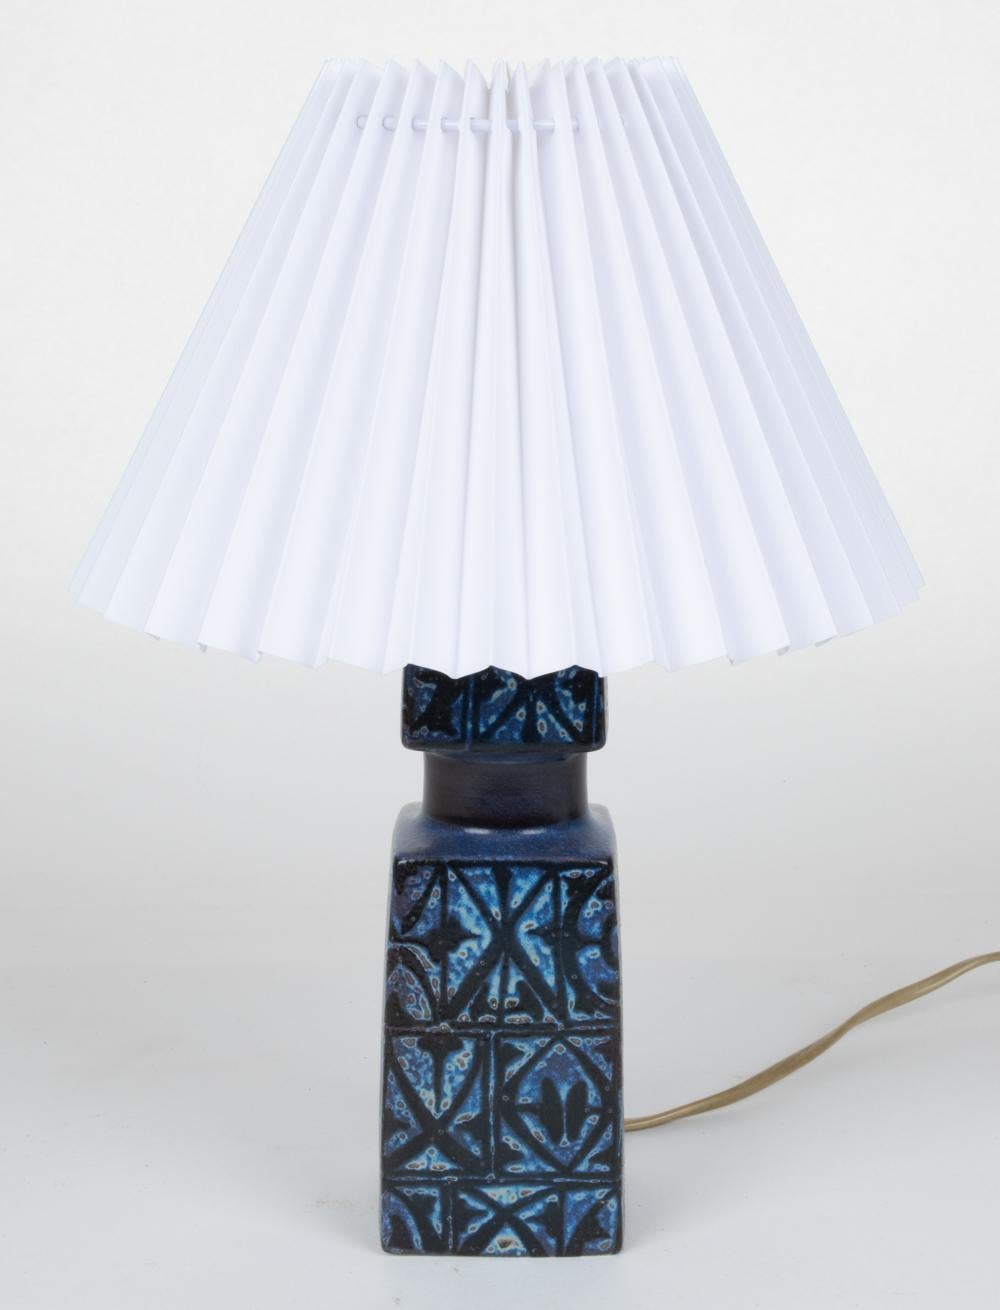 A stunning Scandinavian modern table lamp in petite proportions, designed by Nils Thorsson. Part of the iconic 